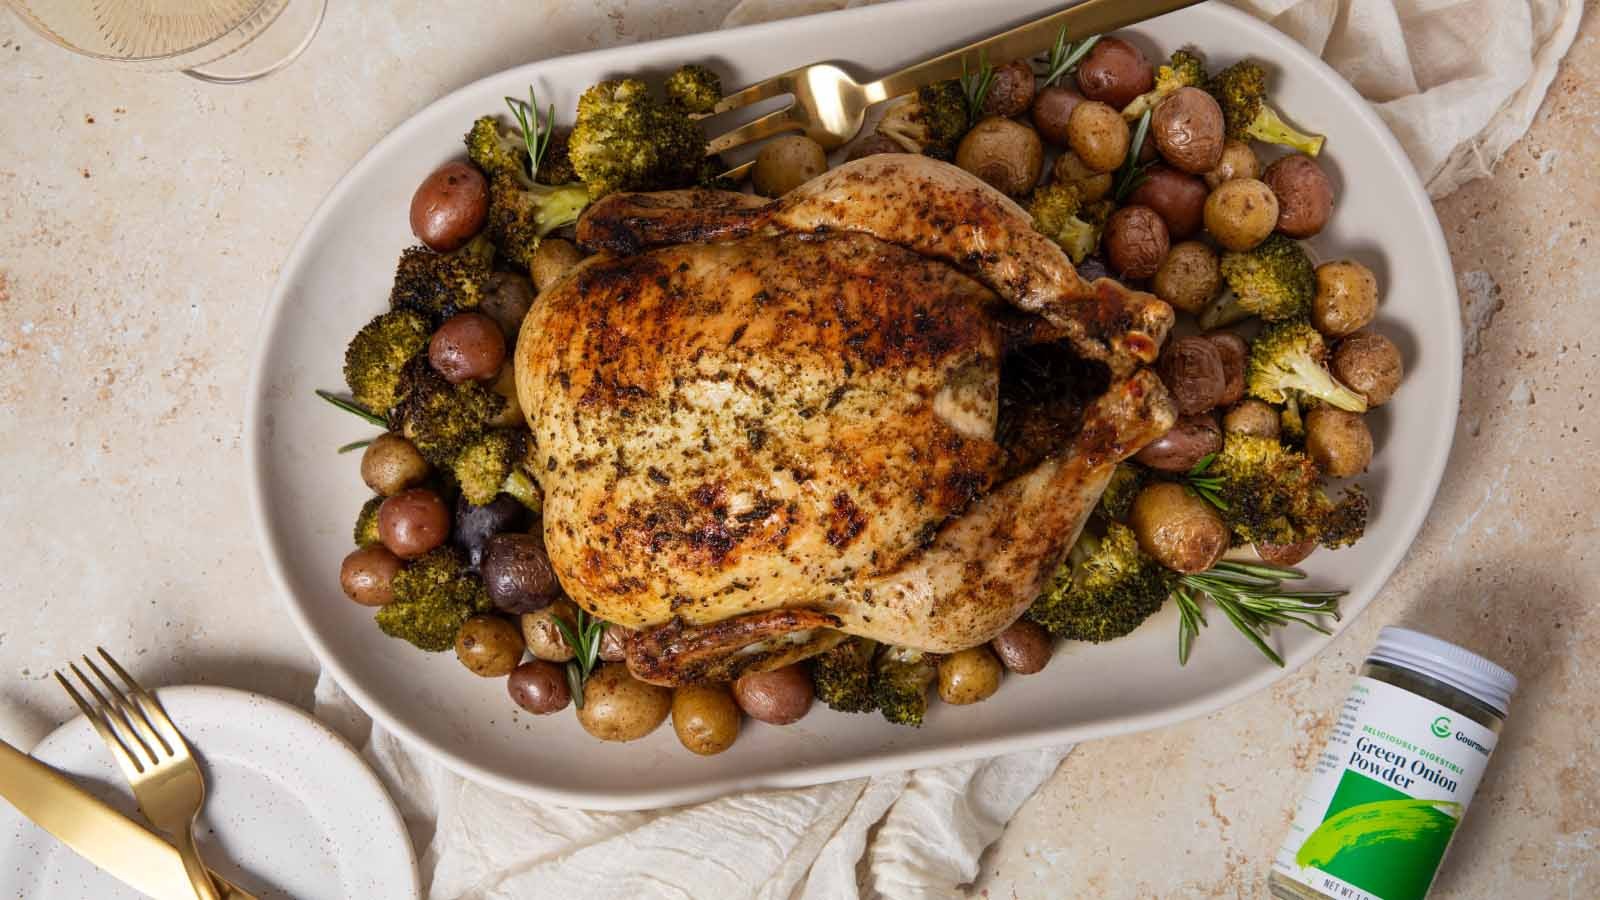 Image of Whole Roasted Chicken with Lemon & Rosemary Potatoes